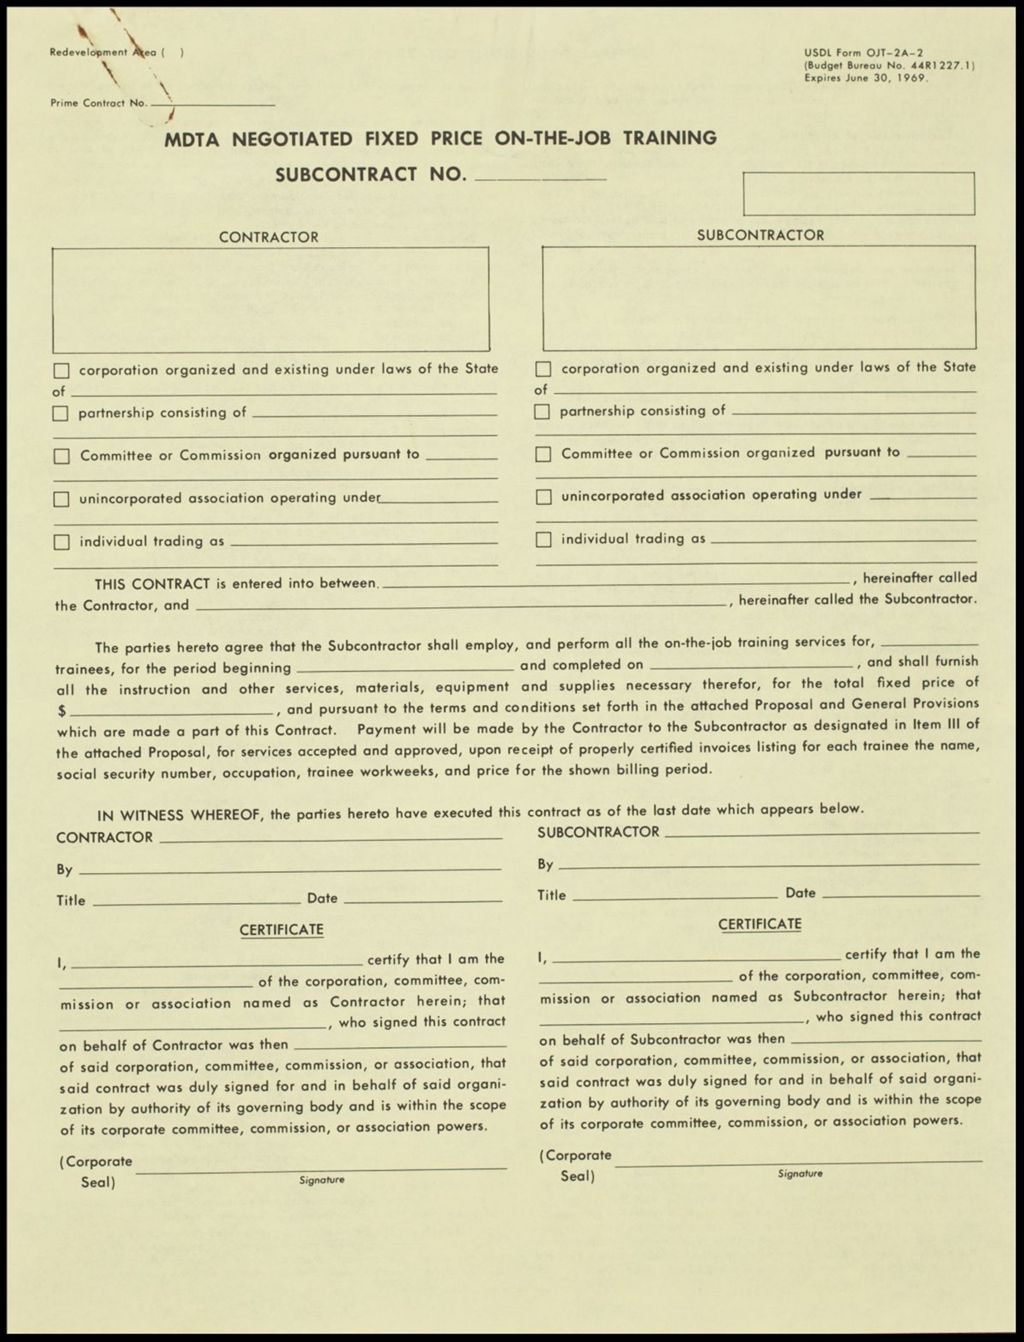 Miniature of Contracts With Subcontractors - Sample, undated (Folder II-14)